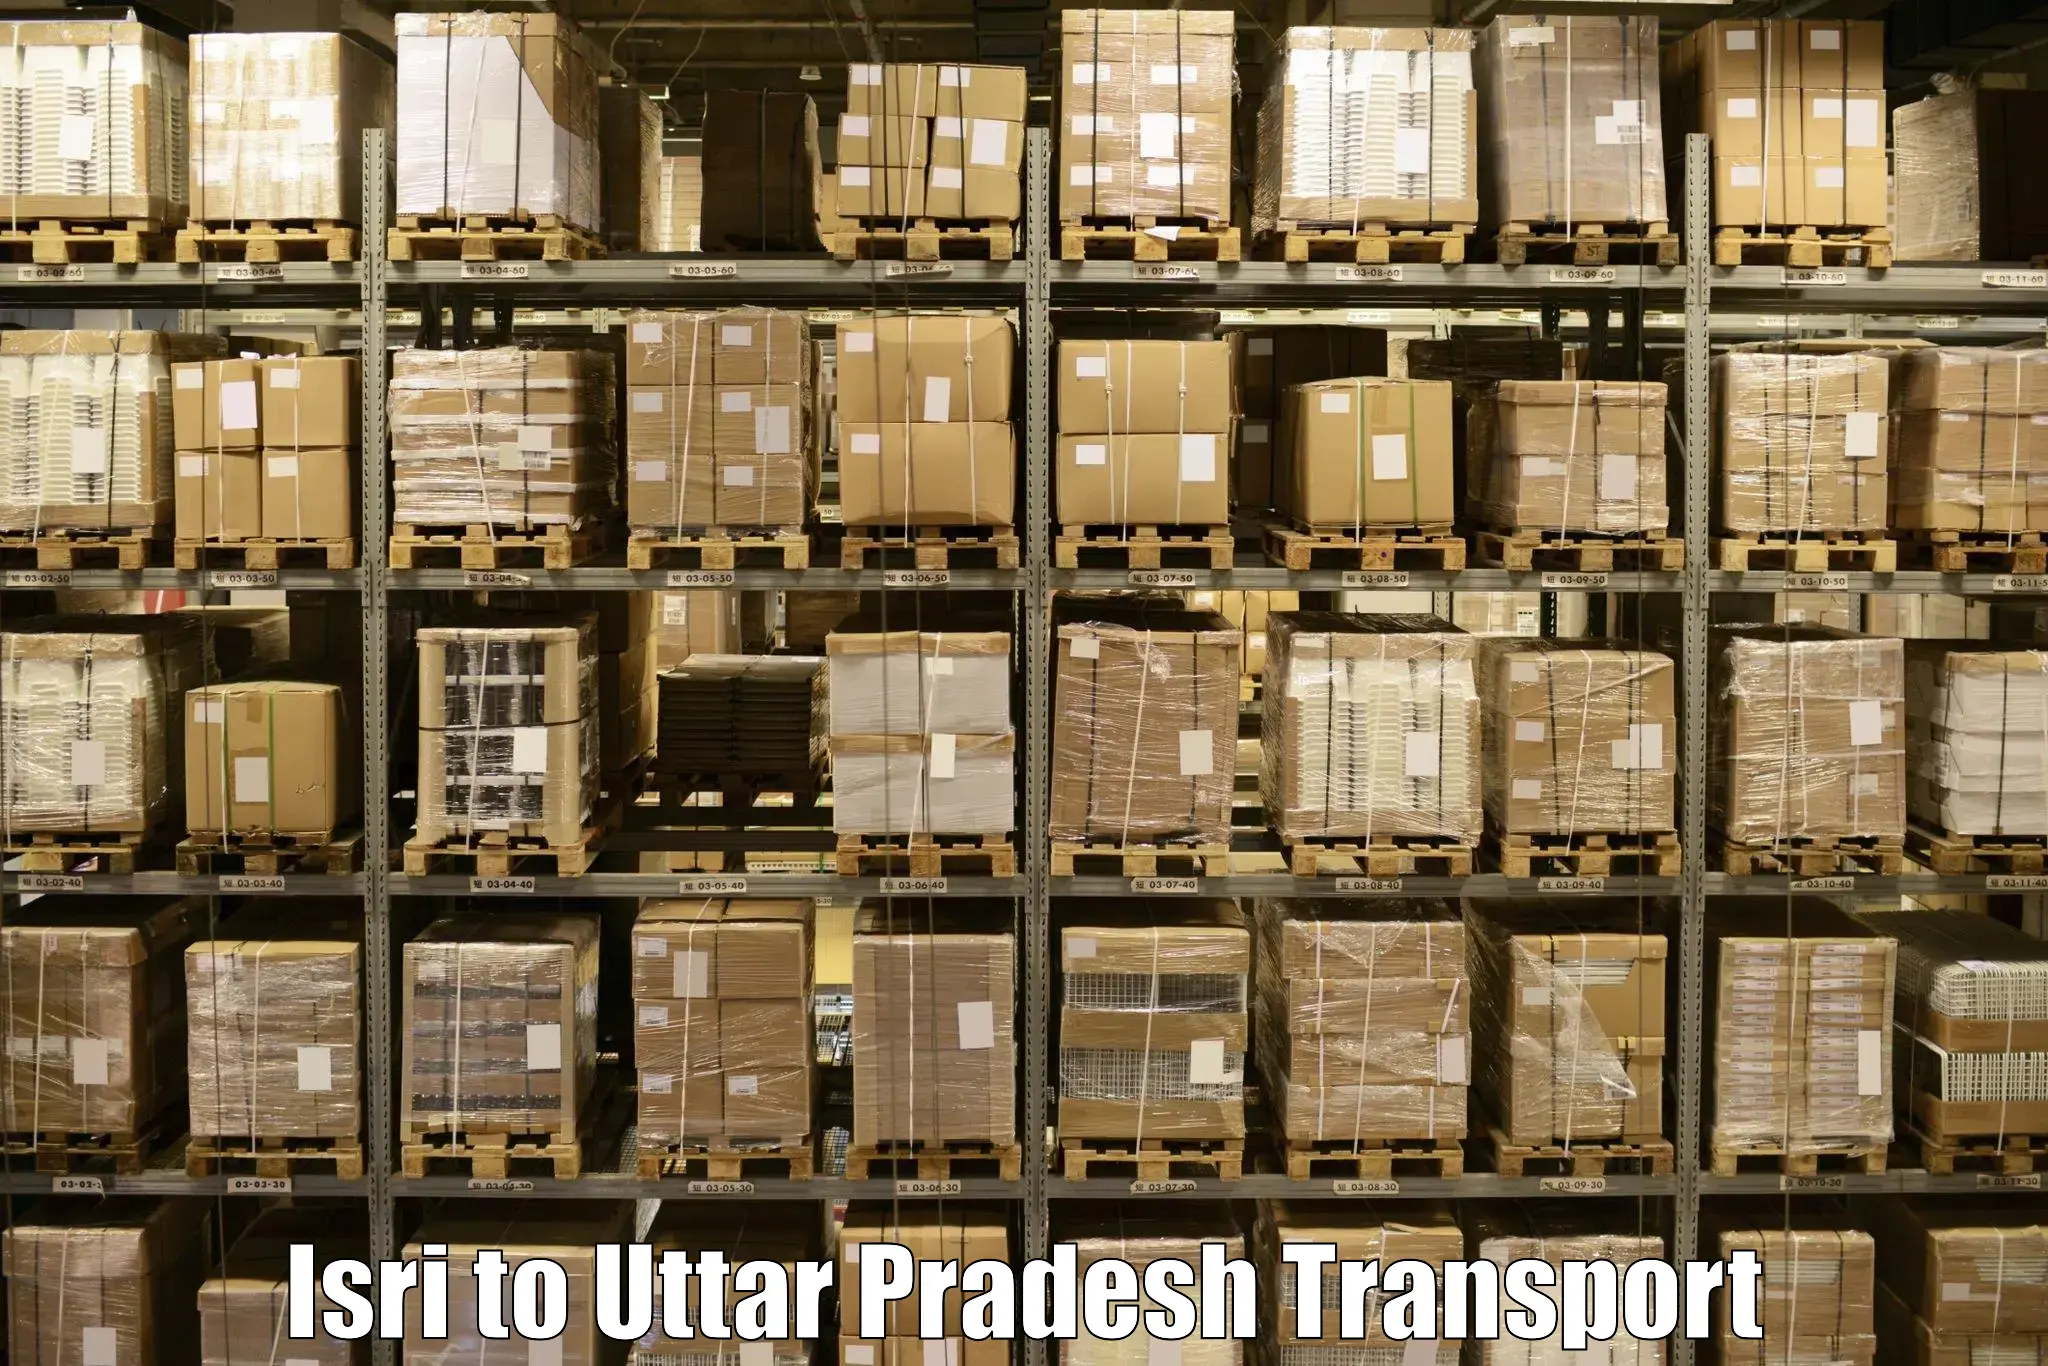 Daily parcel service transport Isri to Rampur Maniharan